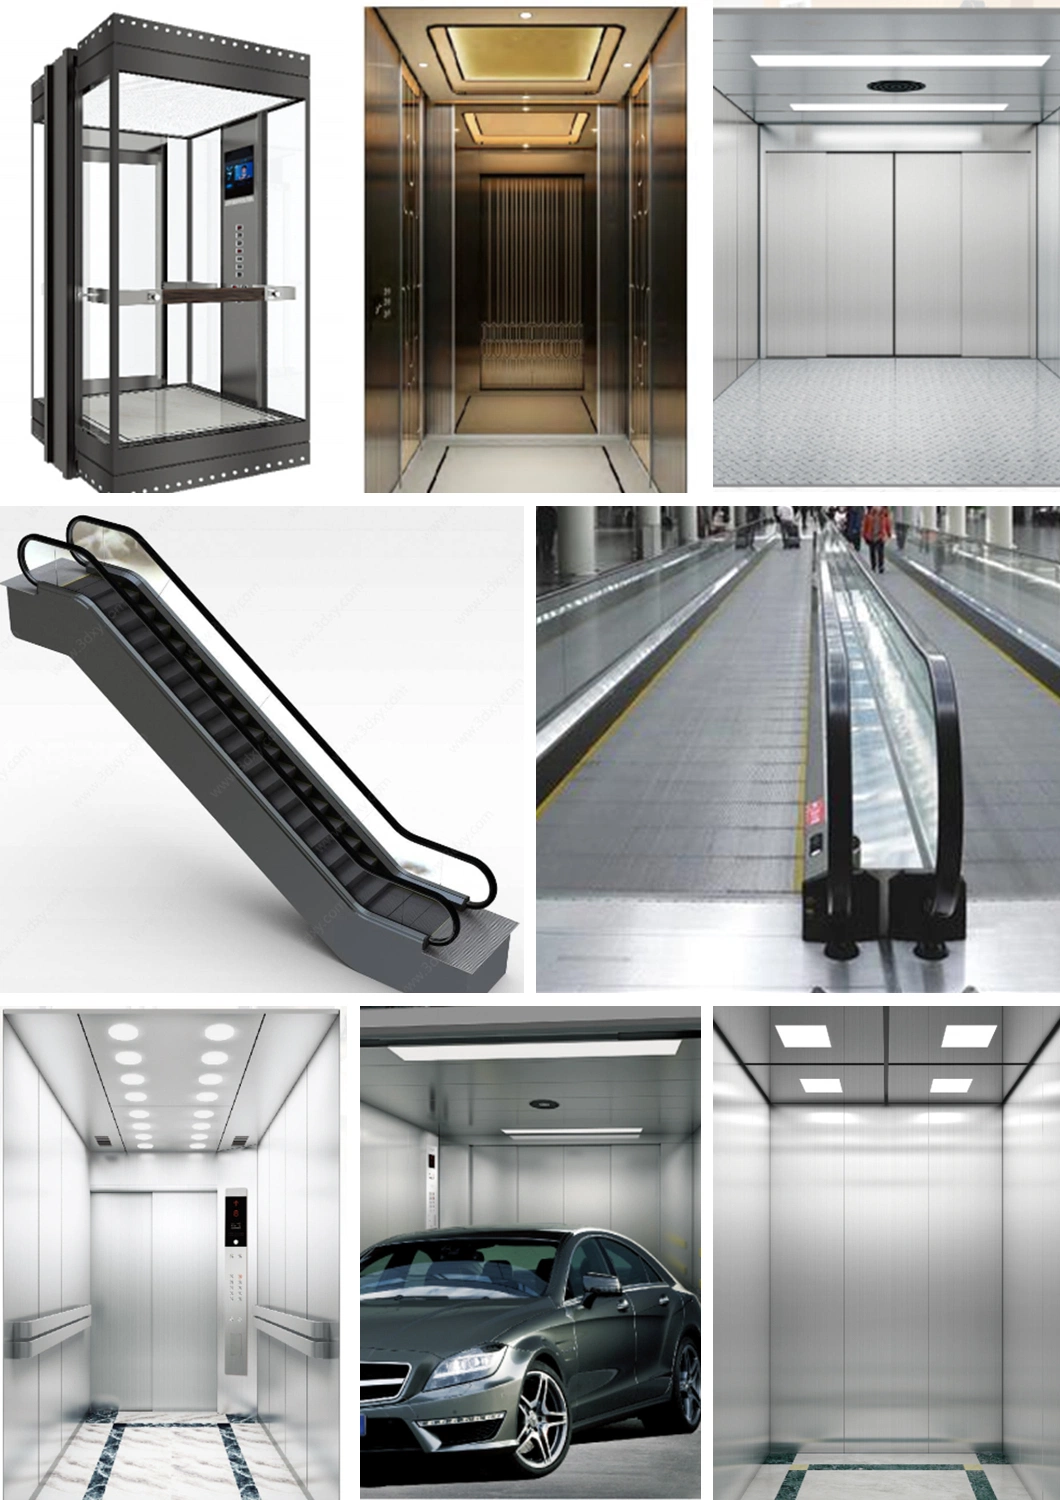 Big Capacity Energy Saving Economic FUJI Vvvf Control Traction Warehouse Car Auto Goods Freight Lift Cargo Elevator with Machine Room and Machine Roomless